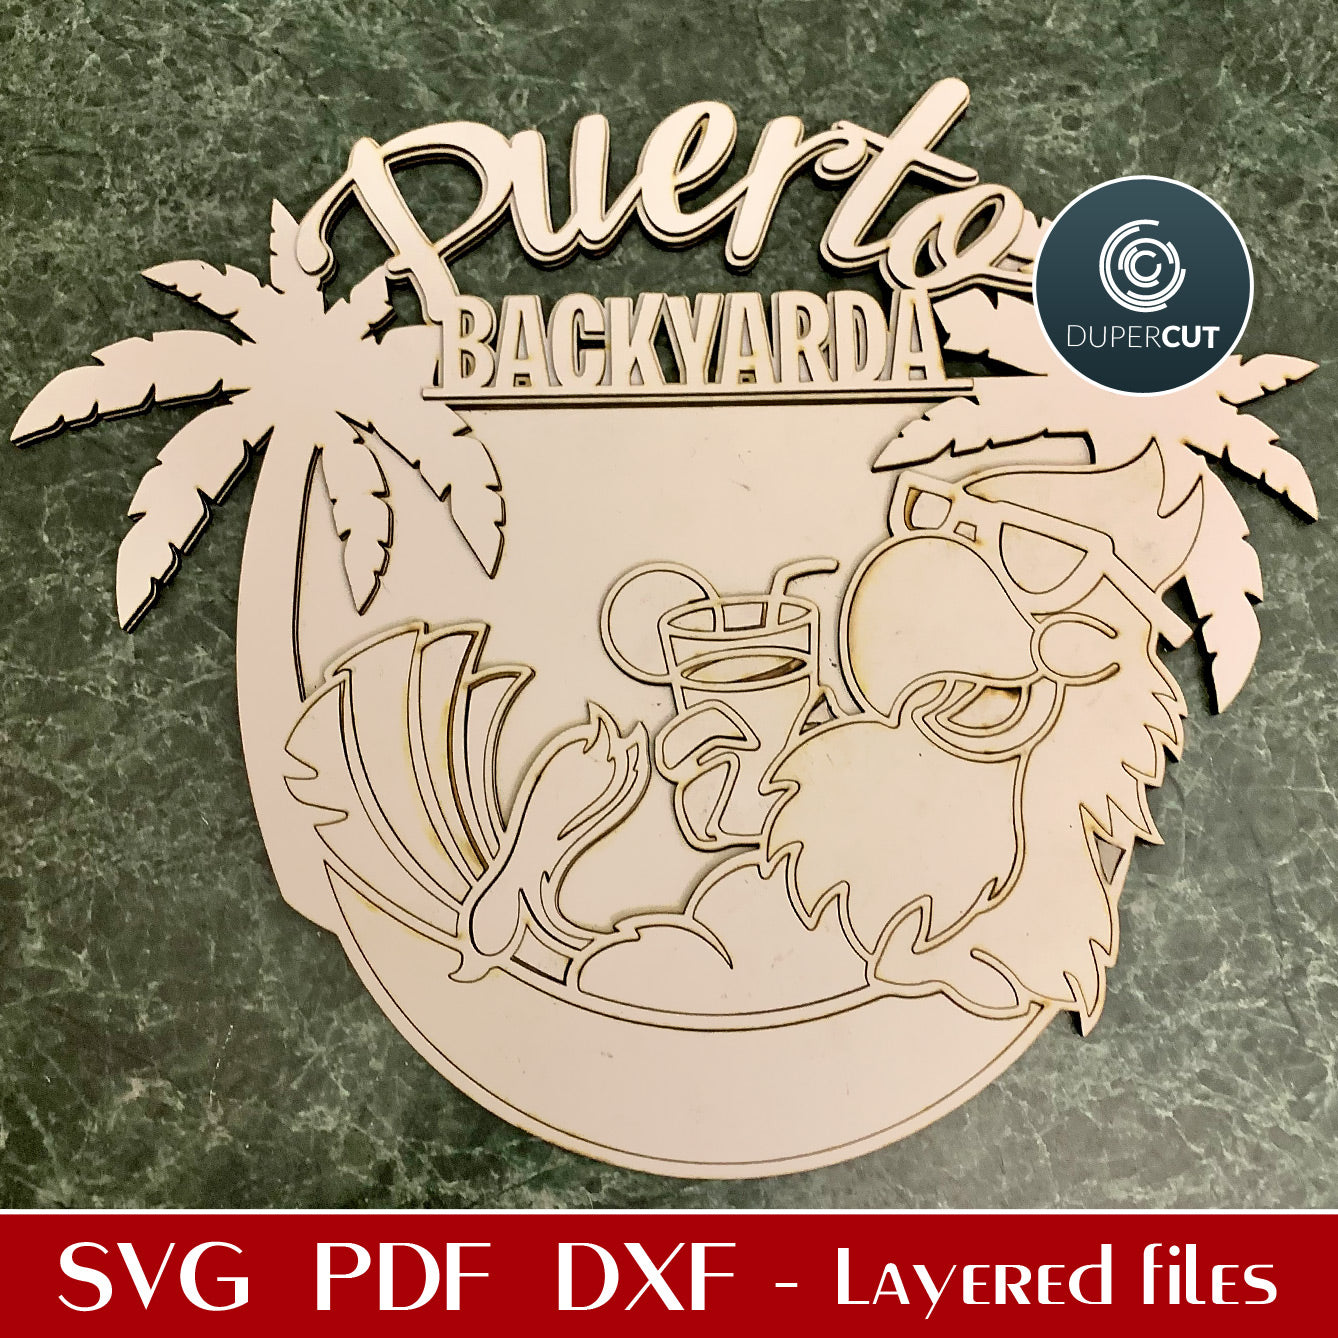 Funny beach welcome sign - parrot in hammock with a drink - SVG DXF vector layered laser cutting files for Glowforge, Cricut, Silhouette, CNC plasma machines by www.DuperCut.com